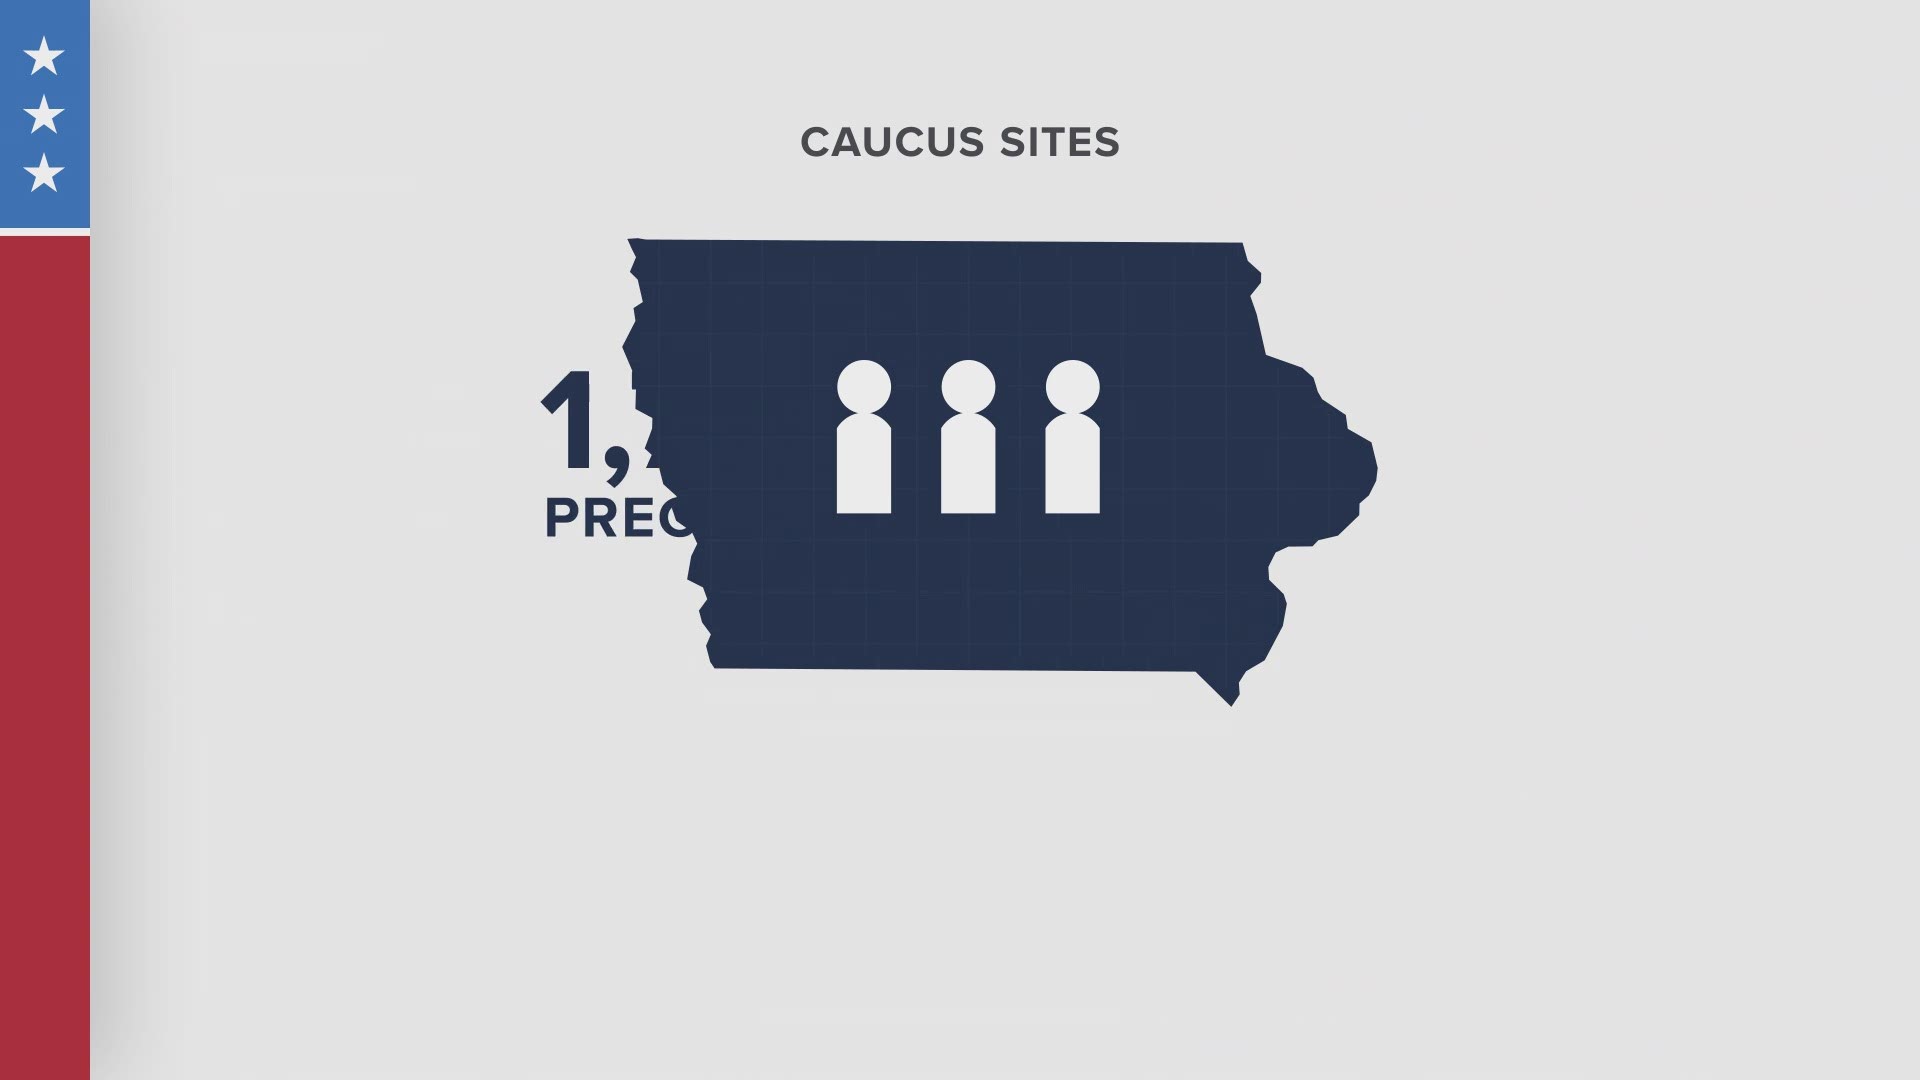 Every four years, Iowa's first-in-the-nation status in the presidential election cycle comes into play. But how exactly do the caucuses work?